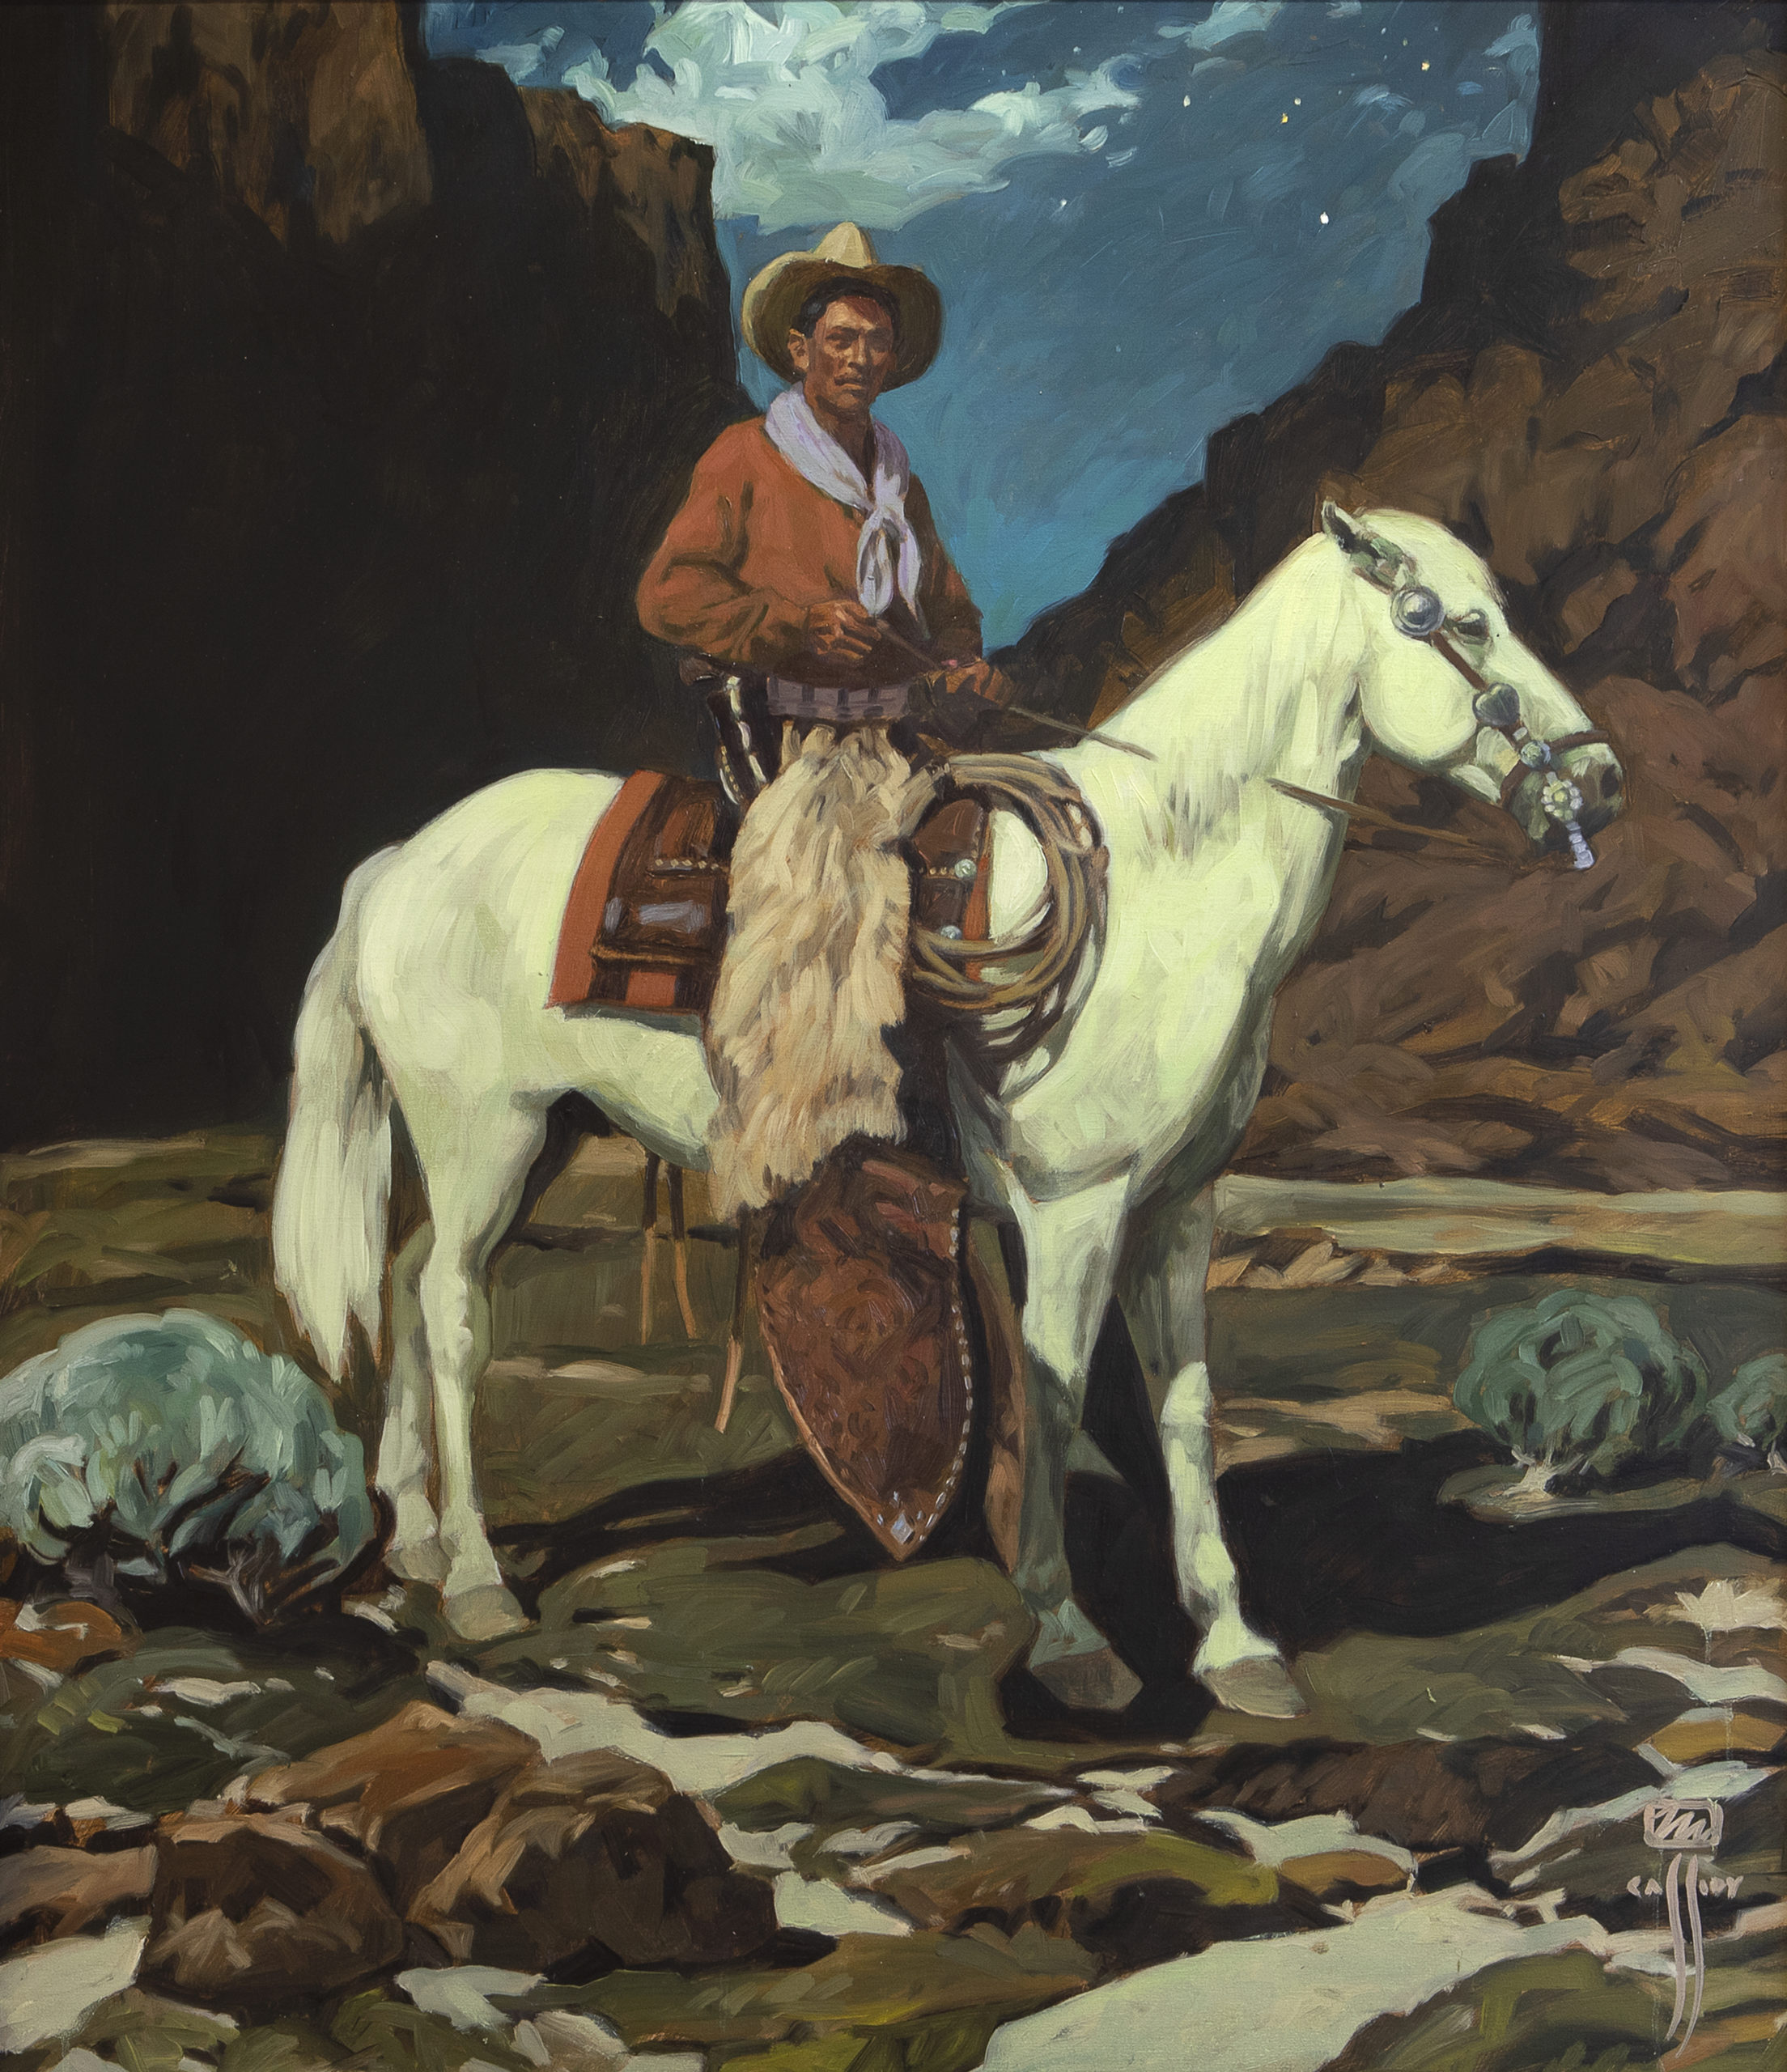 
		                					Michael Cassidy		                																	
																											<i>Cowboy Nocturne,</i>  
																																								2021, 
																																								oil on linen, 
																																								42 1/2 x 36 1/4 inches 
																								
		                				